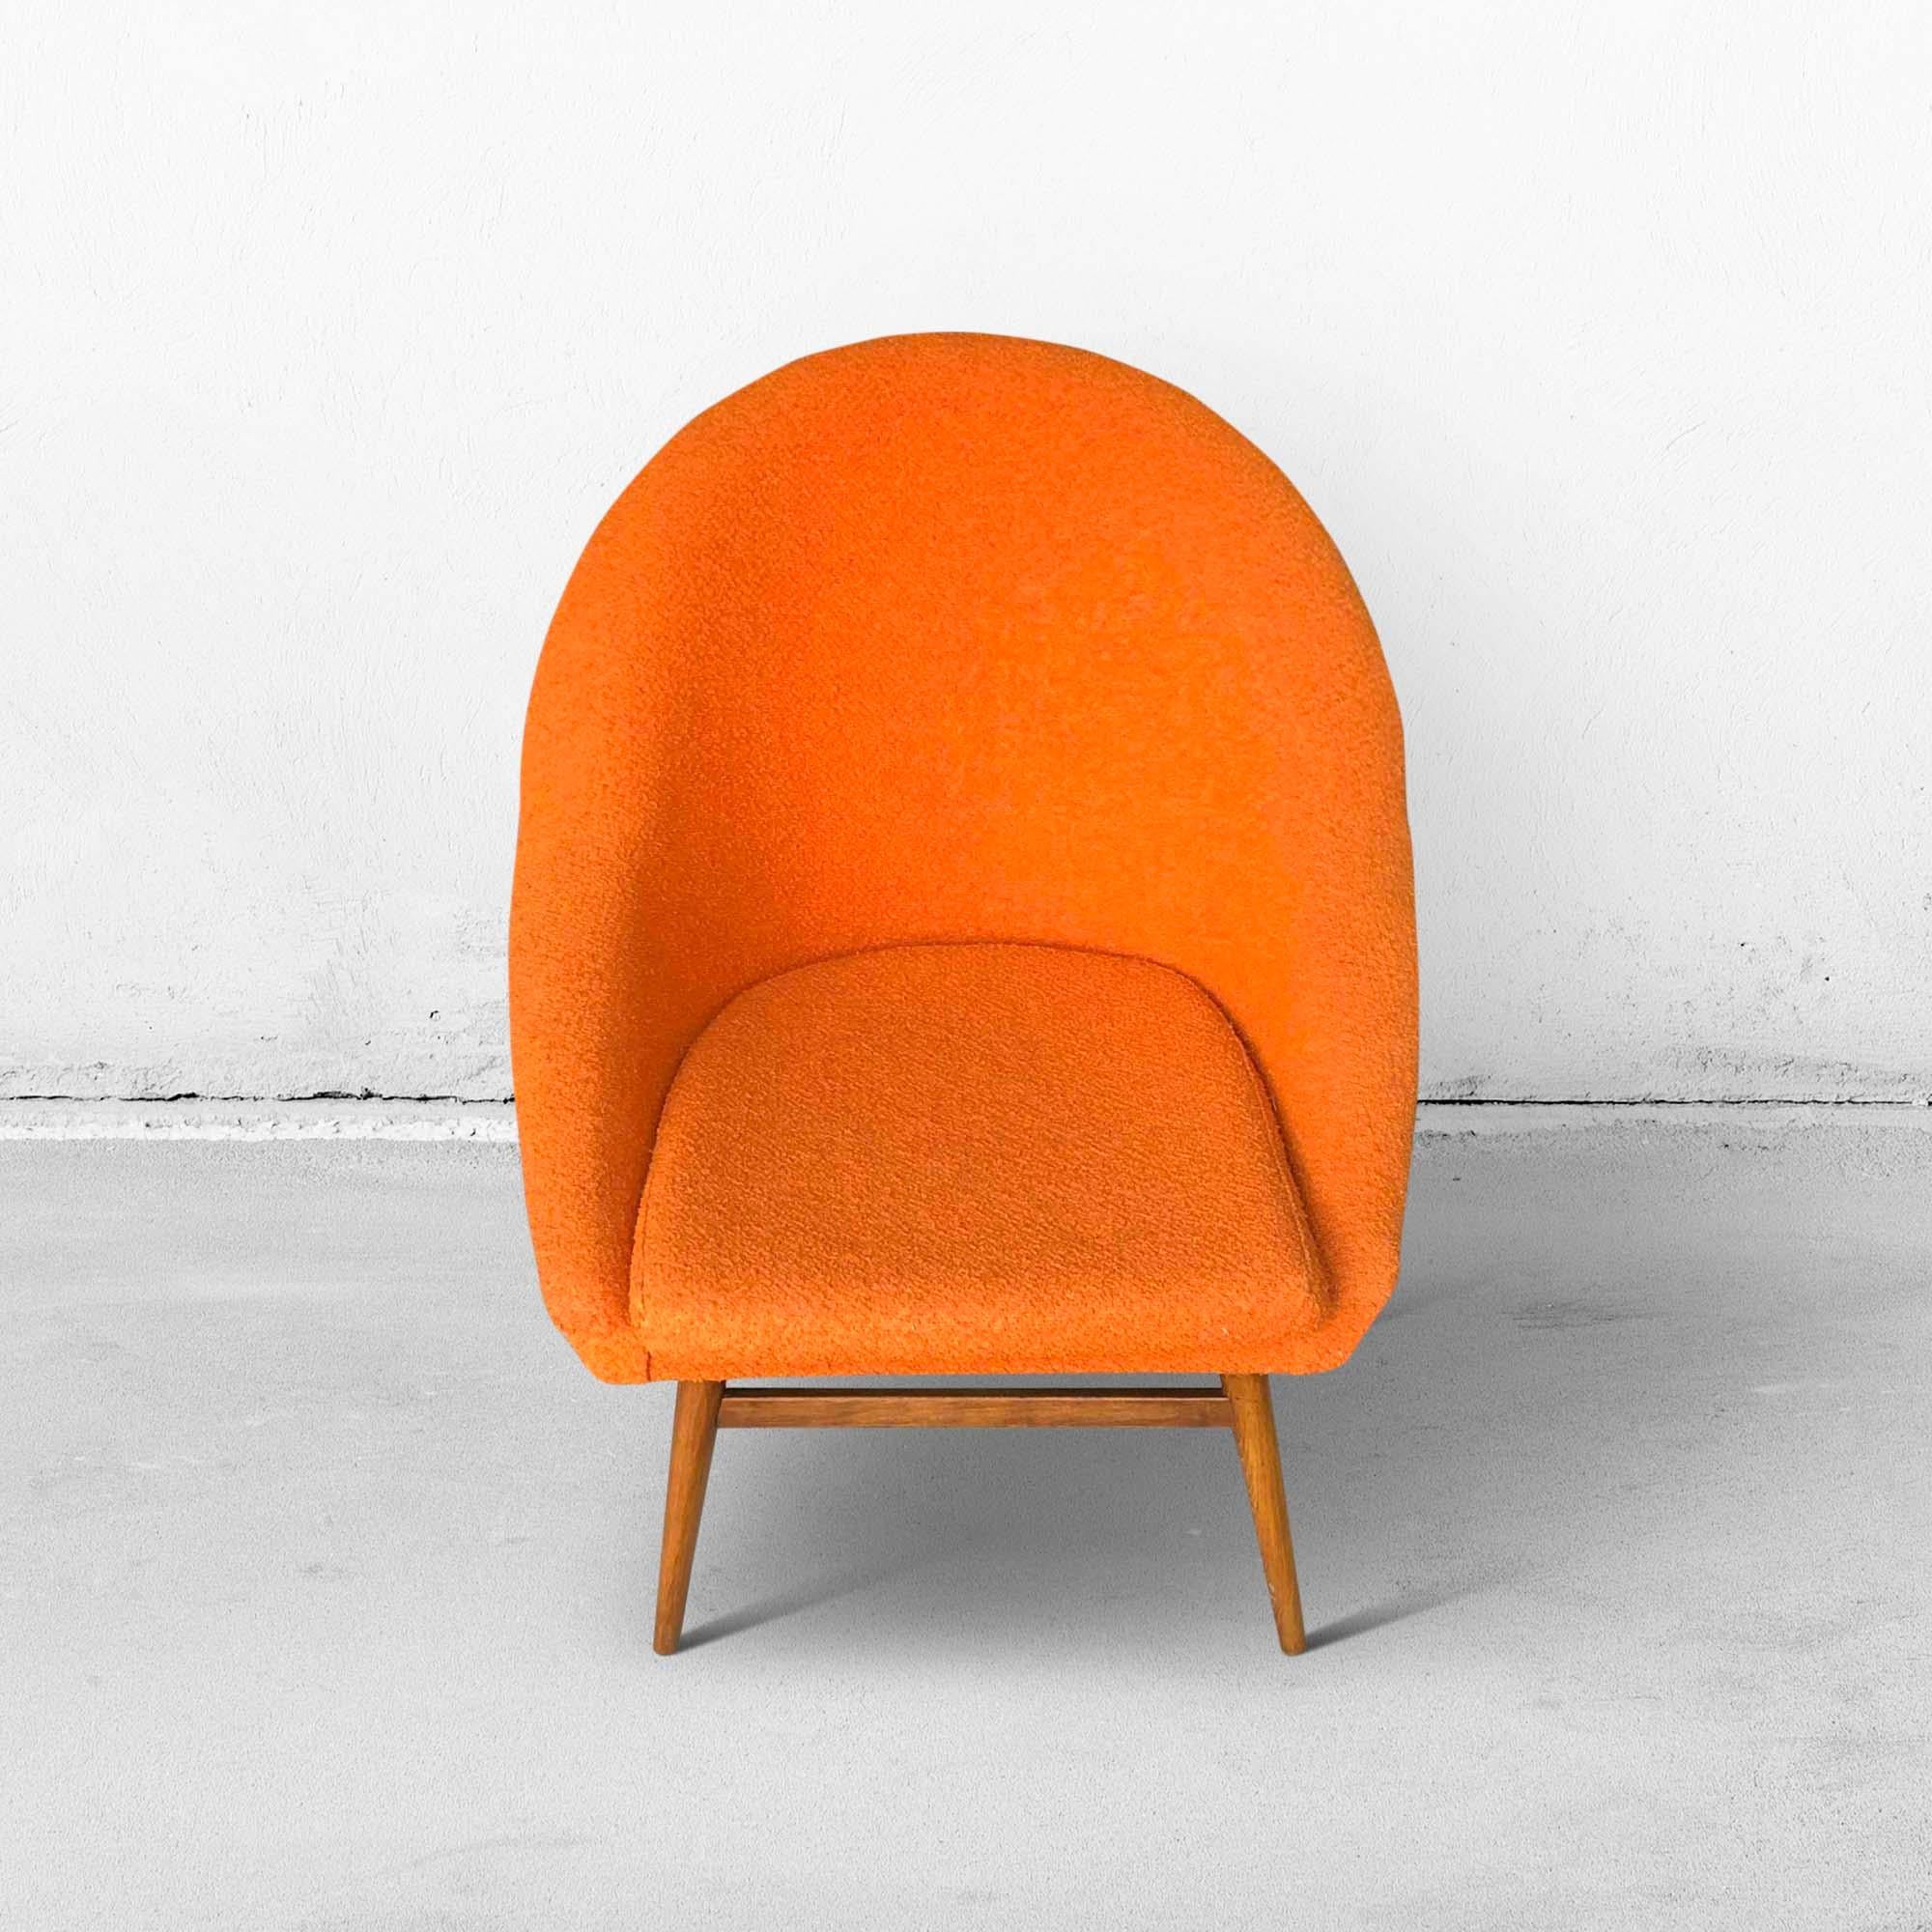 German Vintage Orange Bucket Seats or Cocktail Chairs, 1960s For Sale